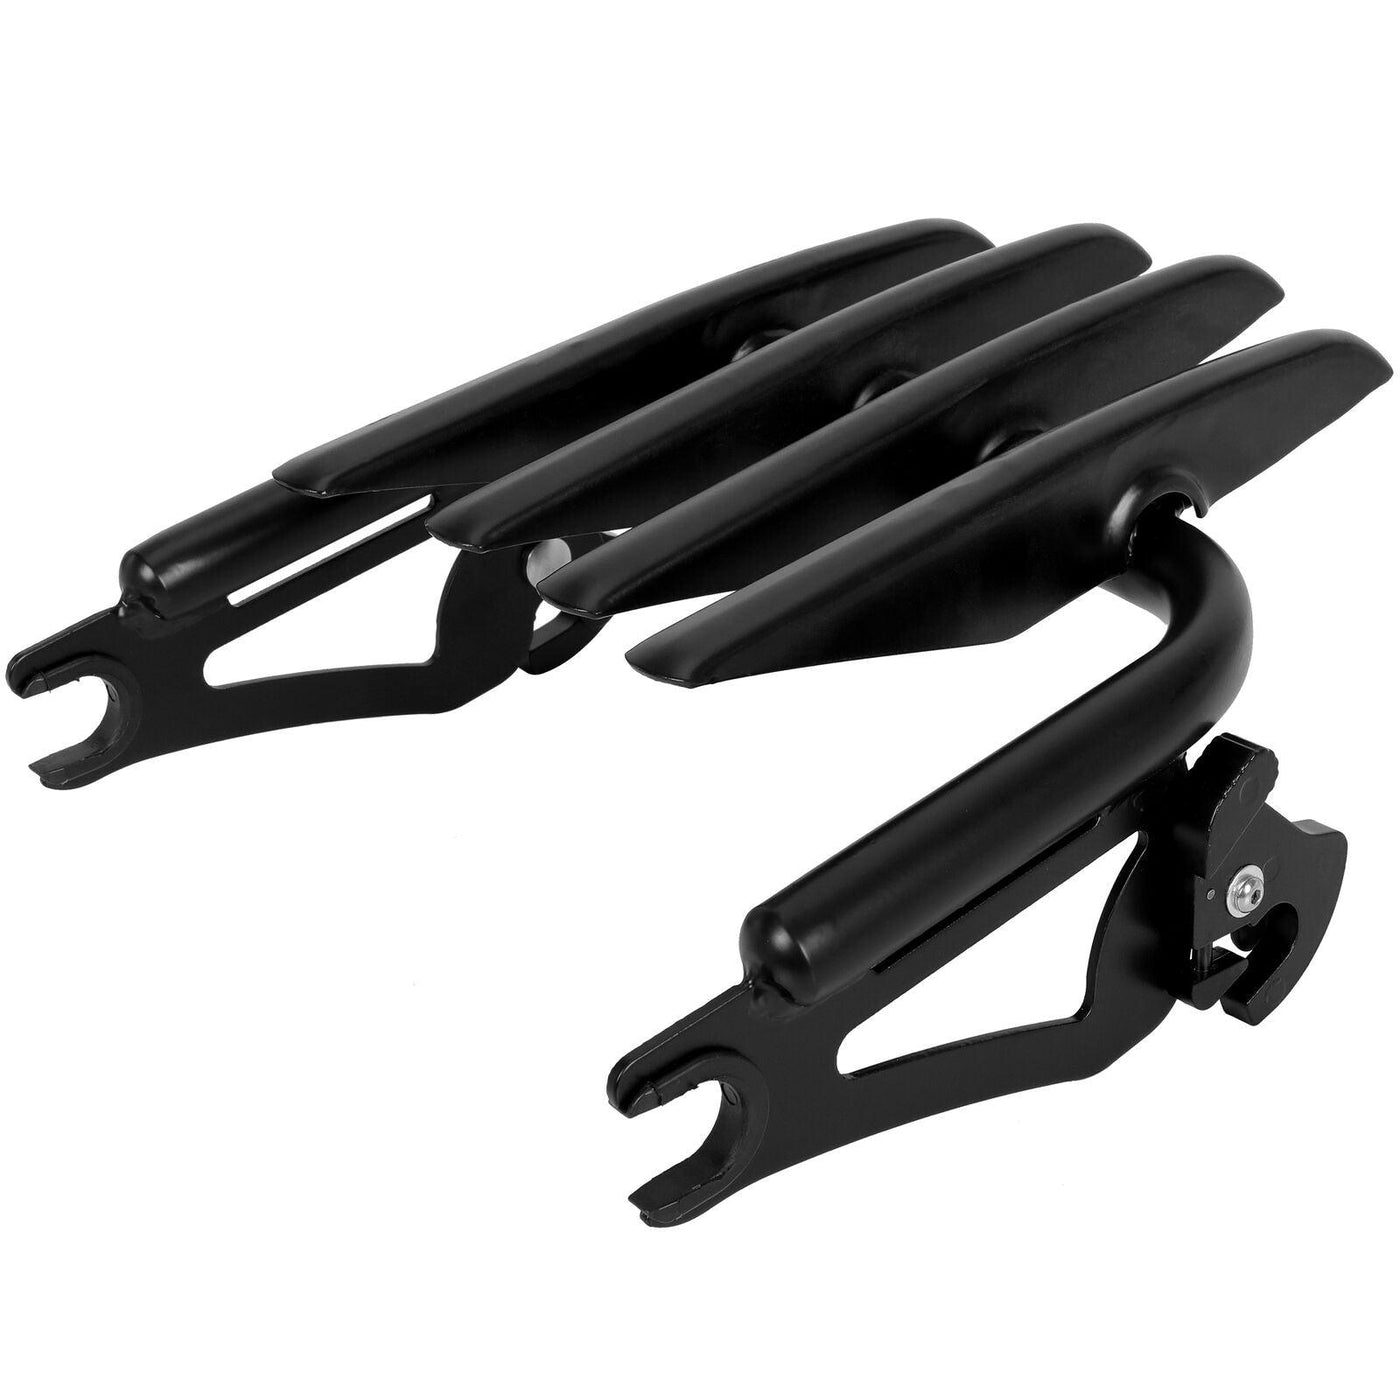 Black Detachable Stealth Trunk Luggage Rack For Harley 09-21 Touring Models - Moto Life Products